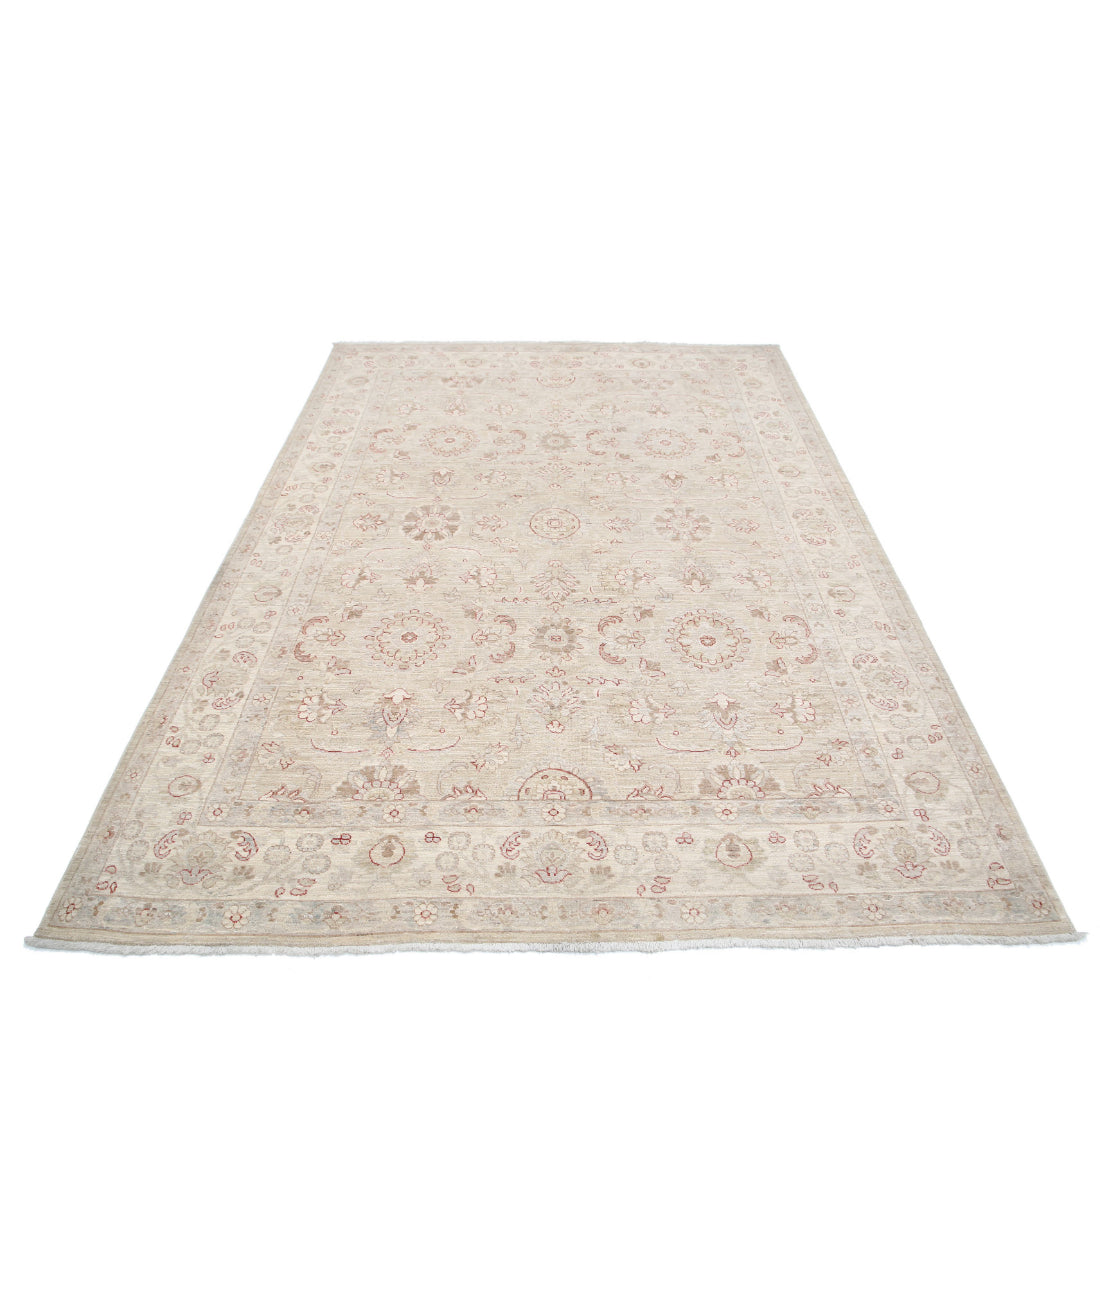 Hand Knotted Bakhtiari Wool Rug - 3'4'' x 4'8'' 3'4'' x 4'8'' (100 X 140) / Red / Blue